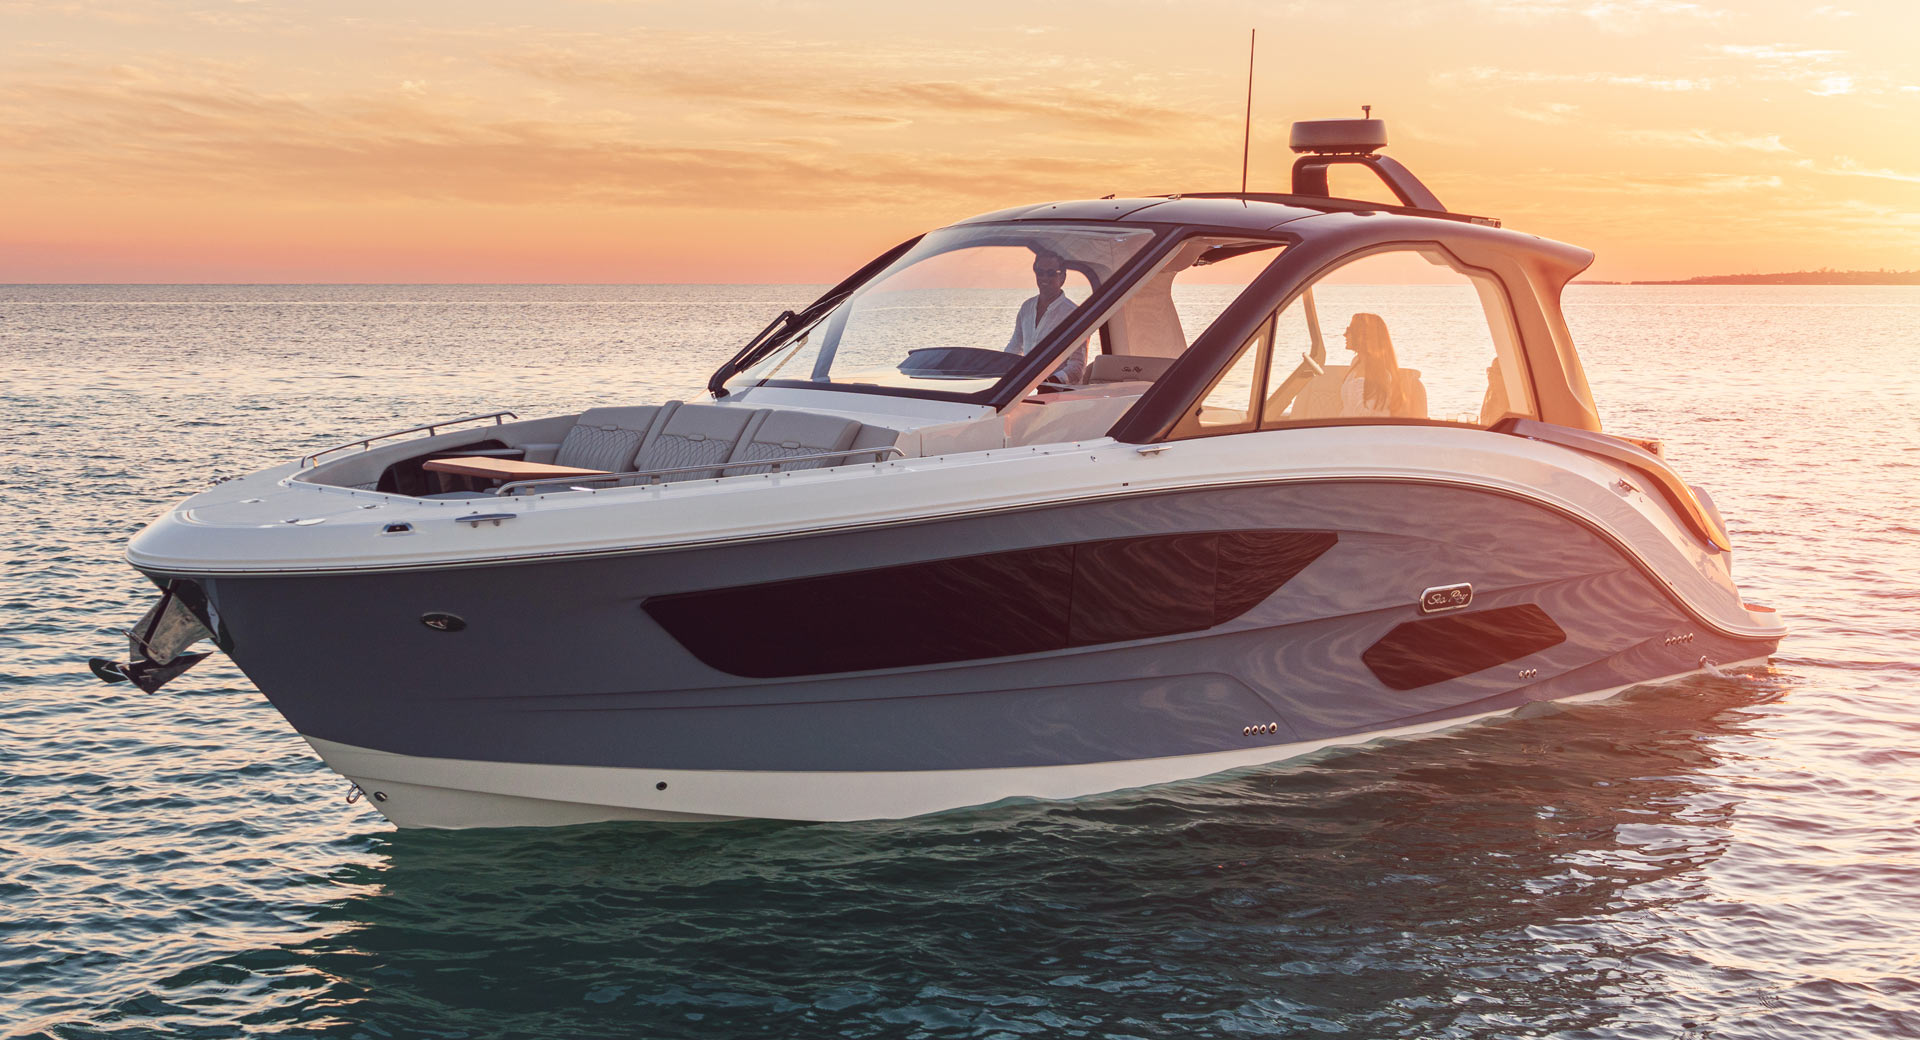 The Ultimate Boating Machine? BMW Designworks And Sea Ray